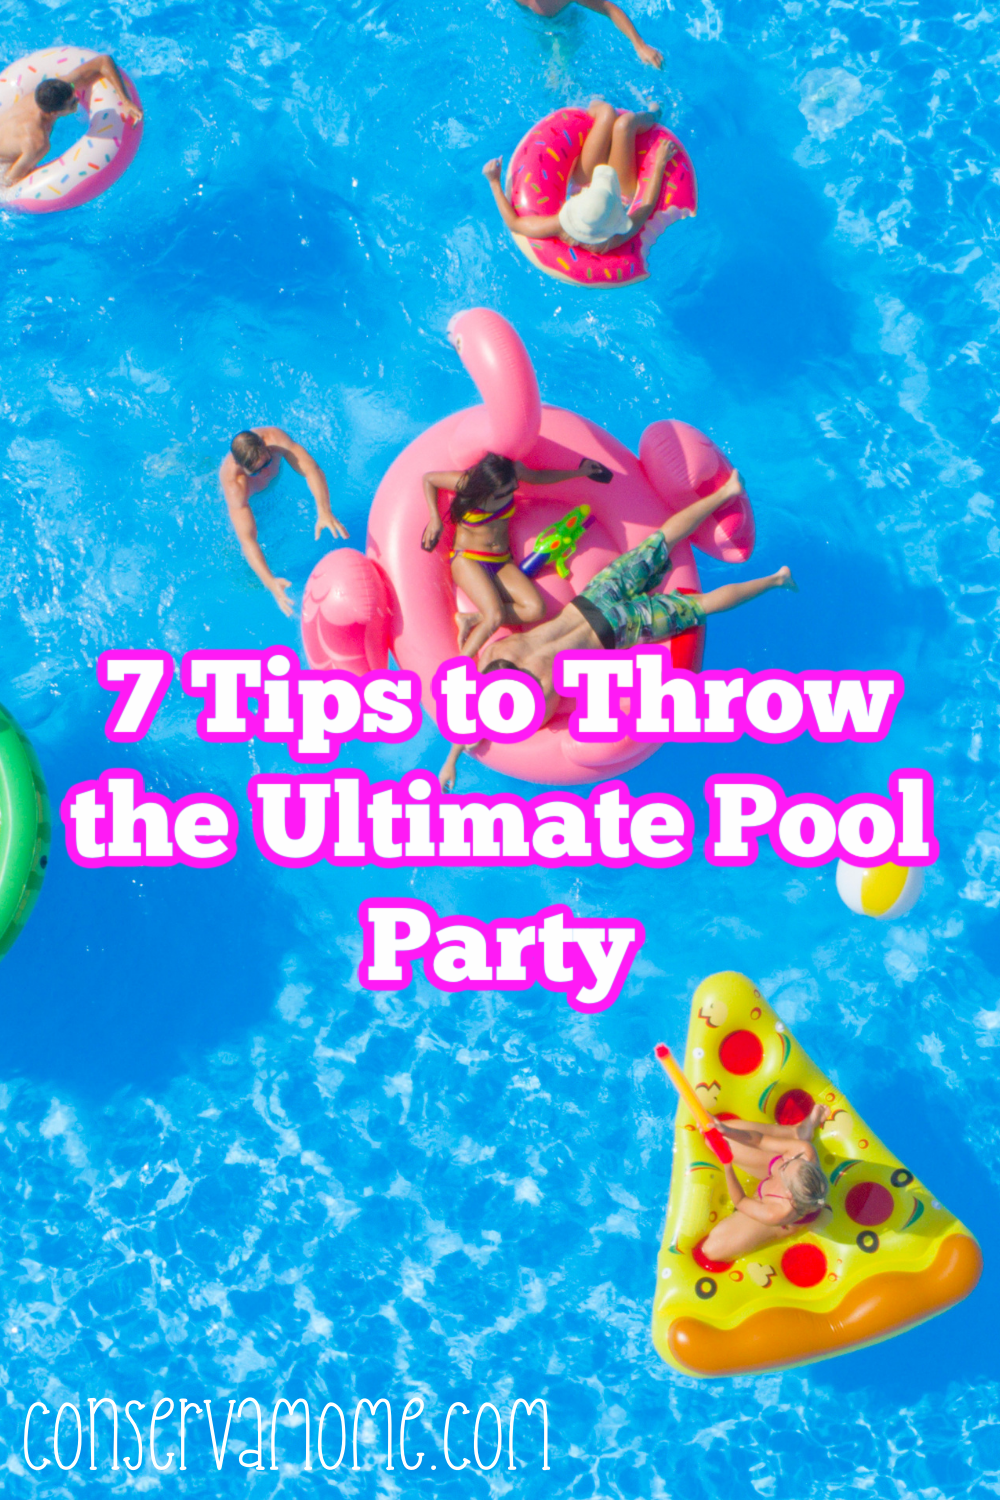 7 Tips to Throw the Ultimate Pool Party